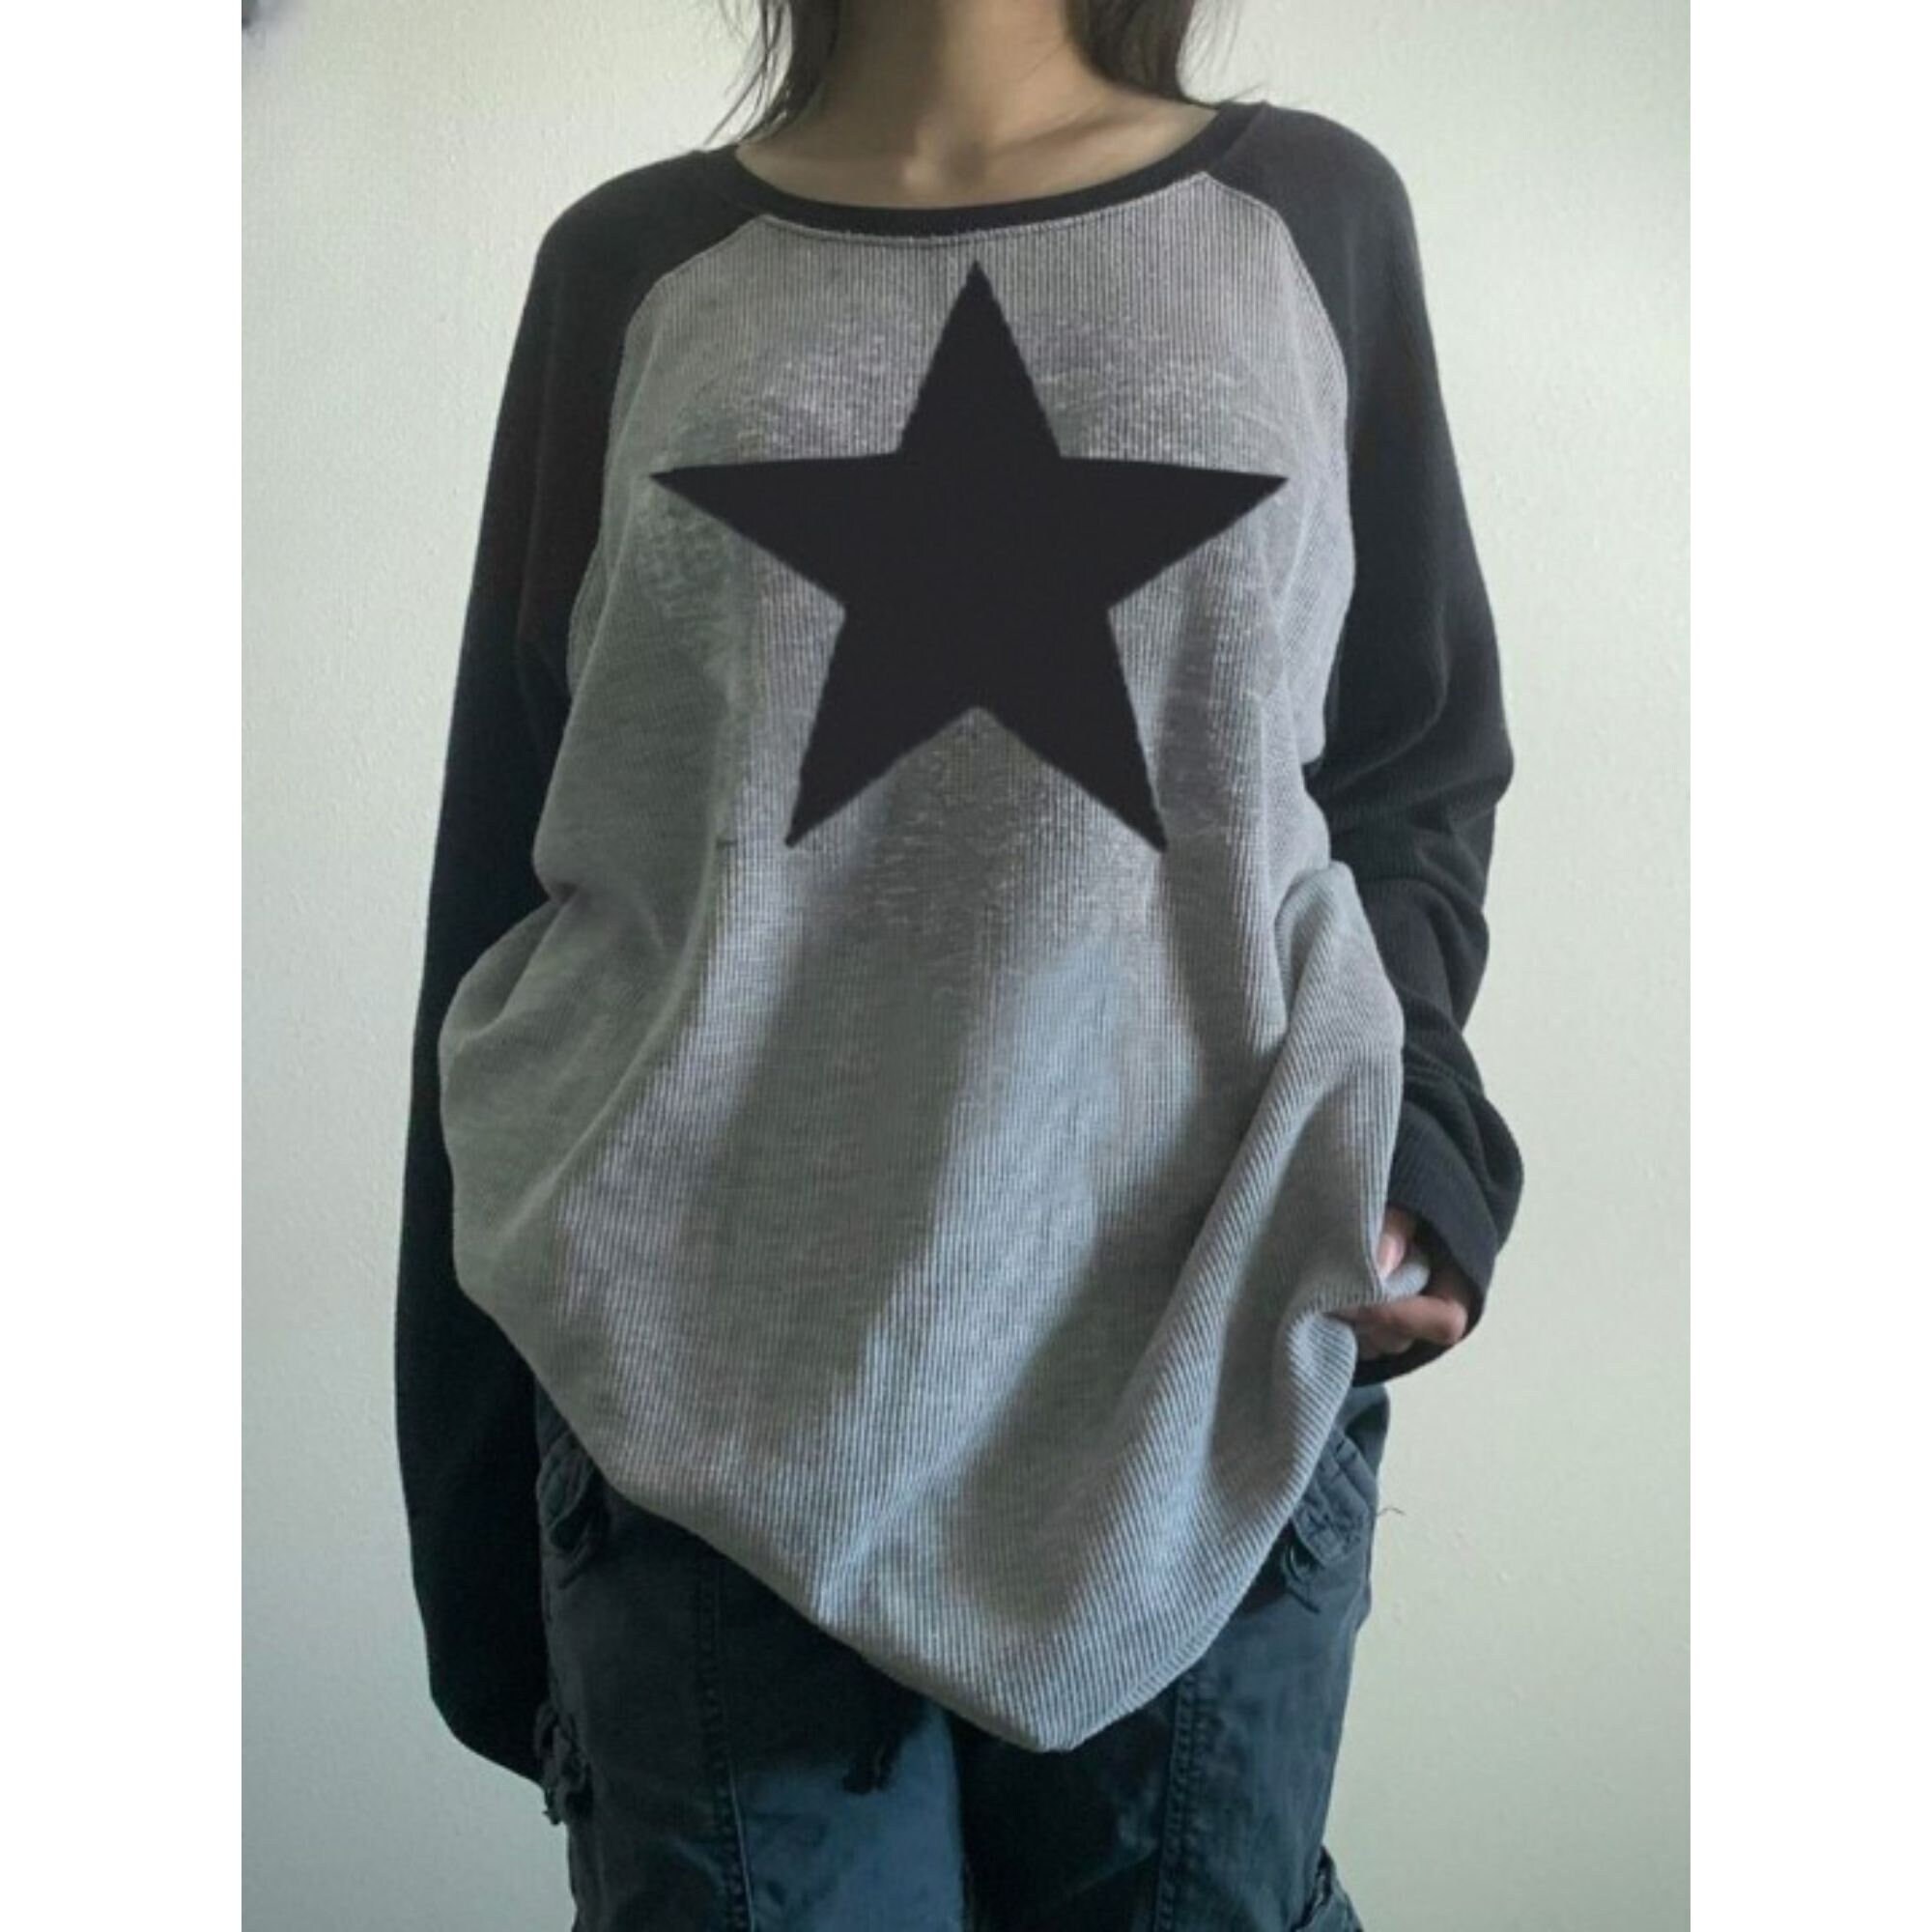 Star Print Shirt Knitted Patchwork Oversized Shirt Streetwear Vintage Retro Y2k Clothing Cottagecore Fairycore